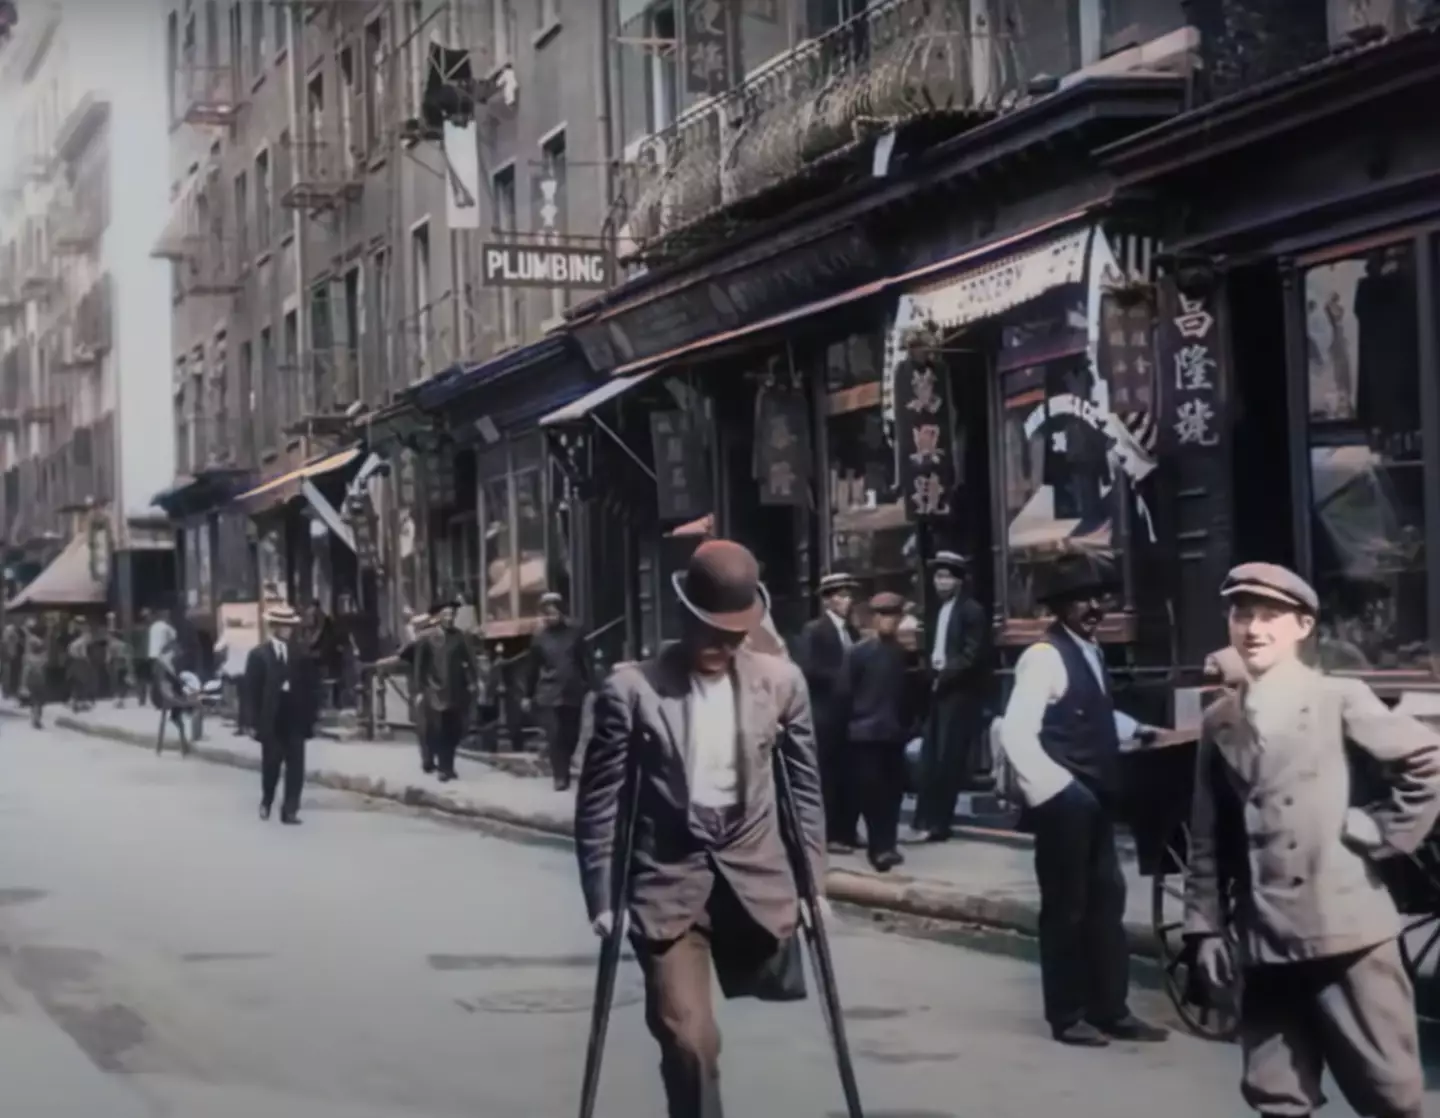 People can now get a better idea of what the world once looked like over a century ago.